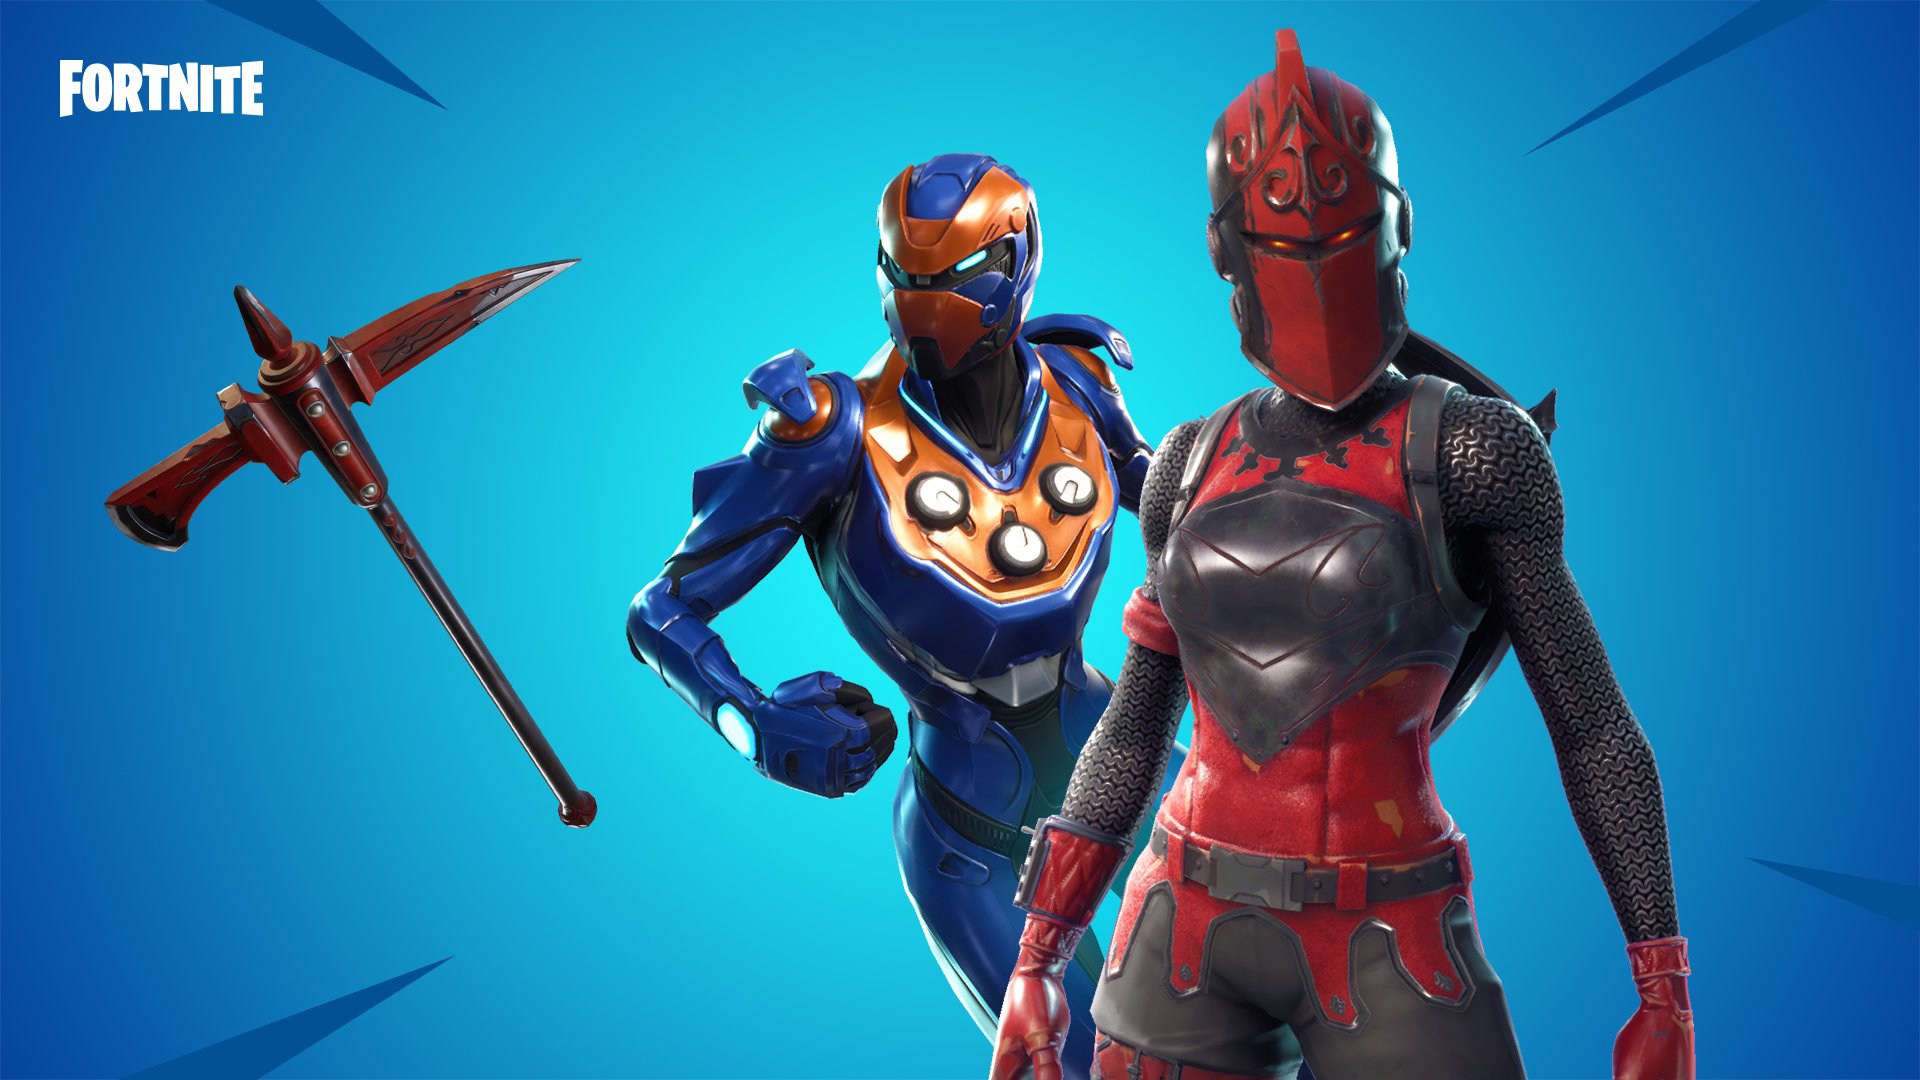 Fortnite Red Knight Skin - Character, PNG, Images - Pro Guides